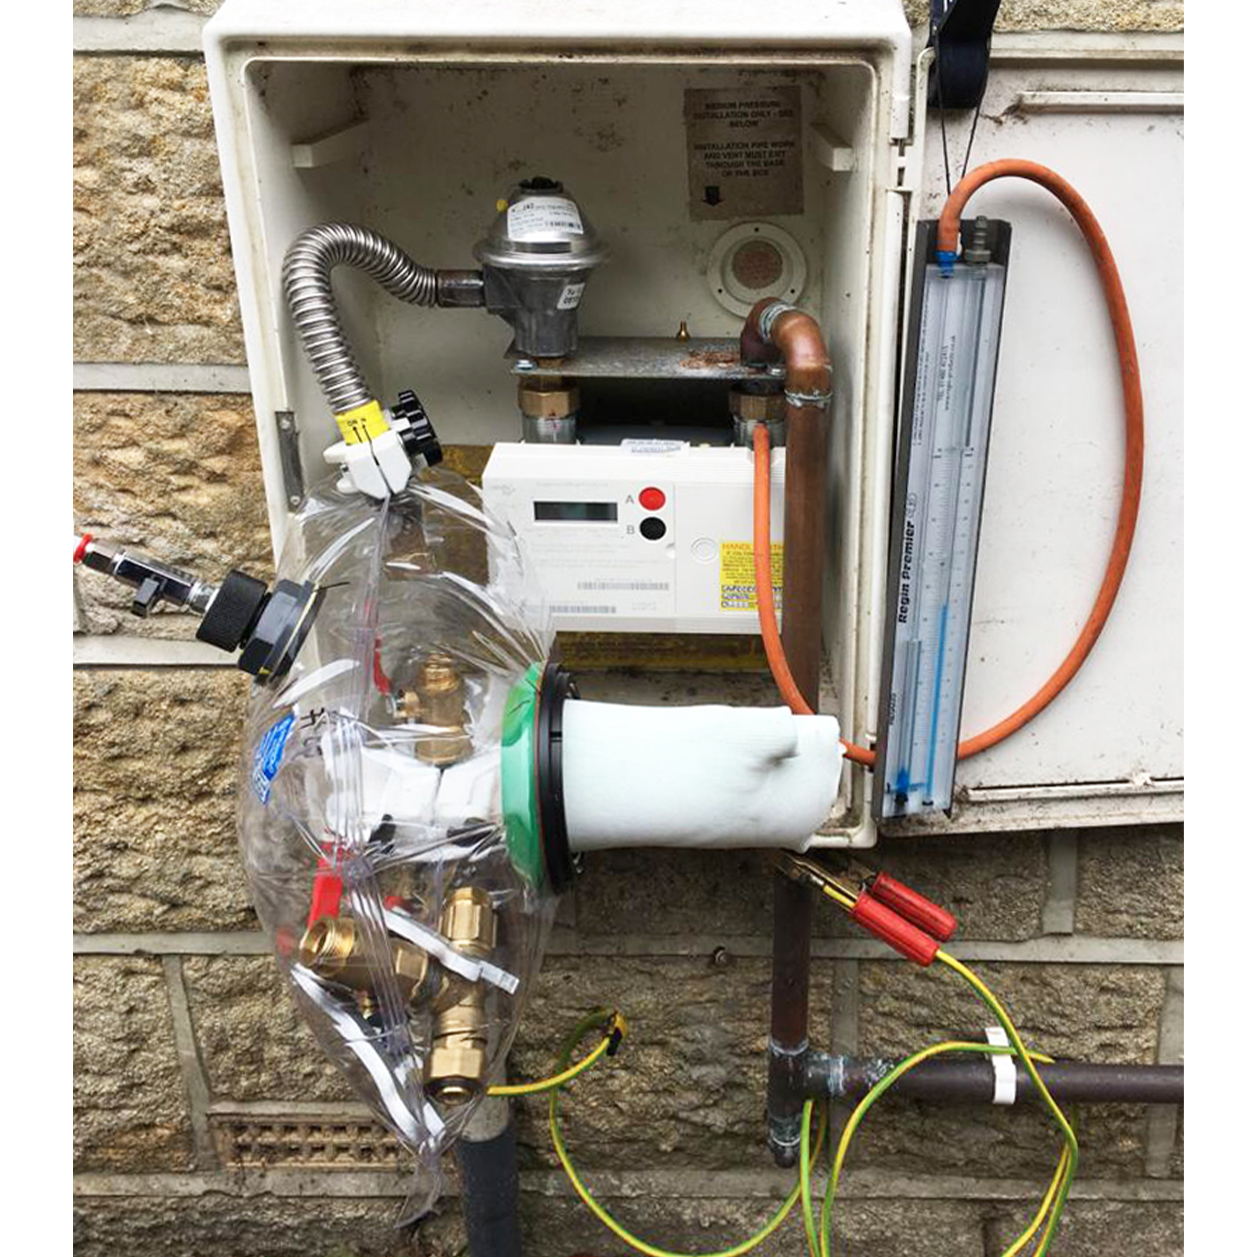 Using servibag on a gas meter